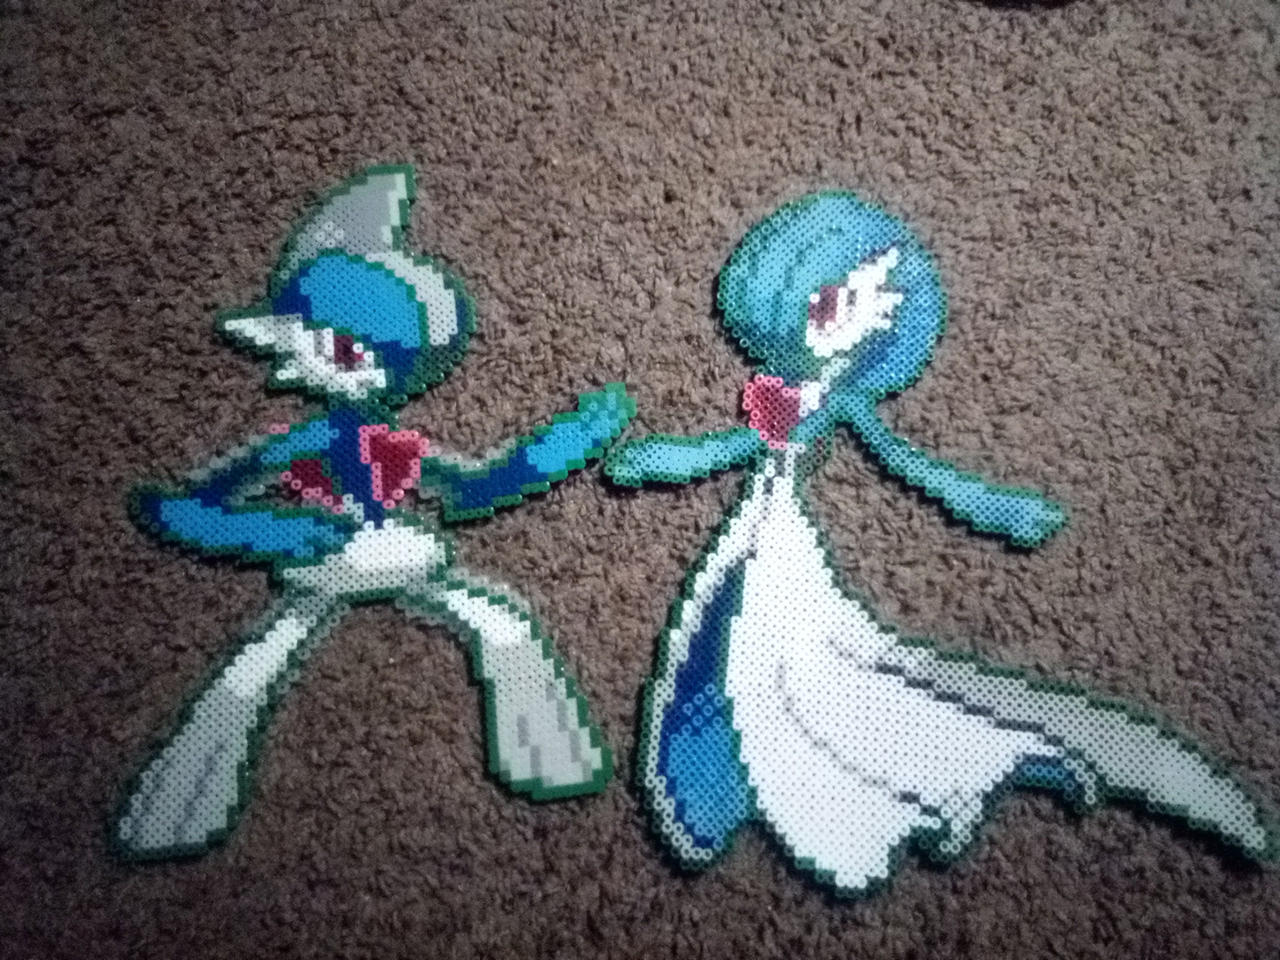 Pixilart - Shiny Gallade And Gardevoir by Turtles